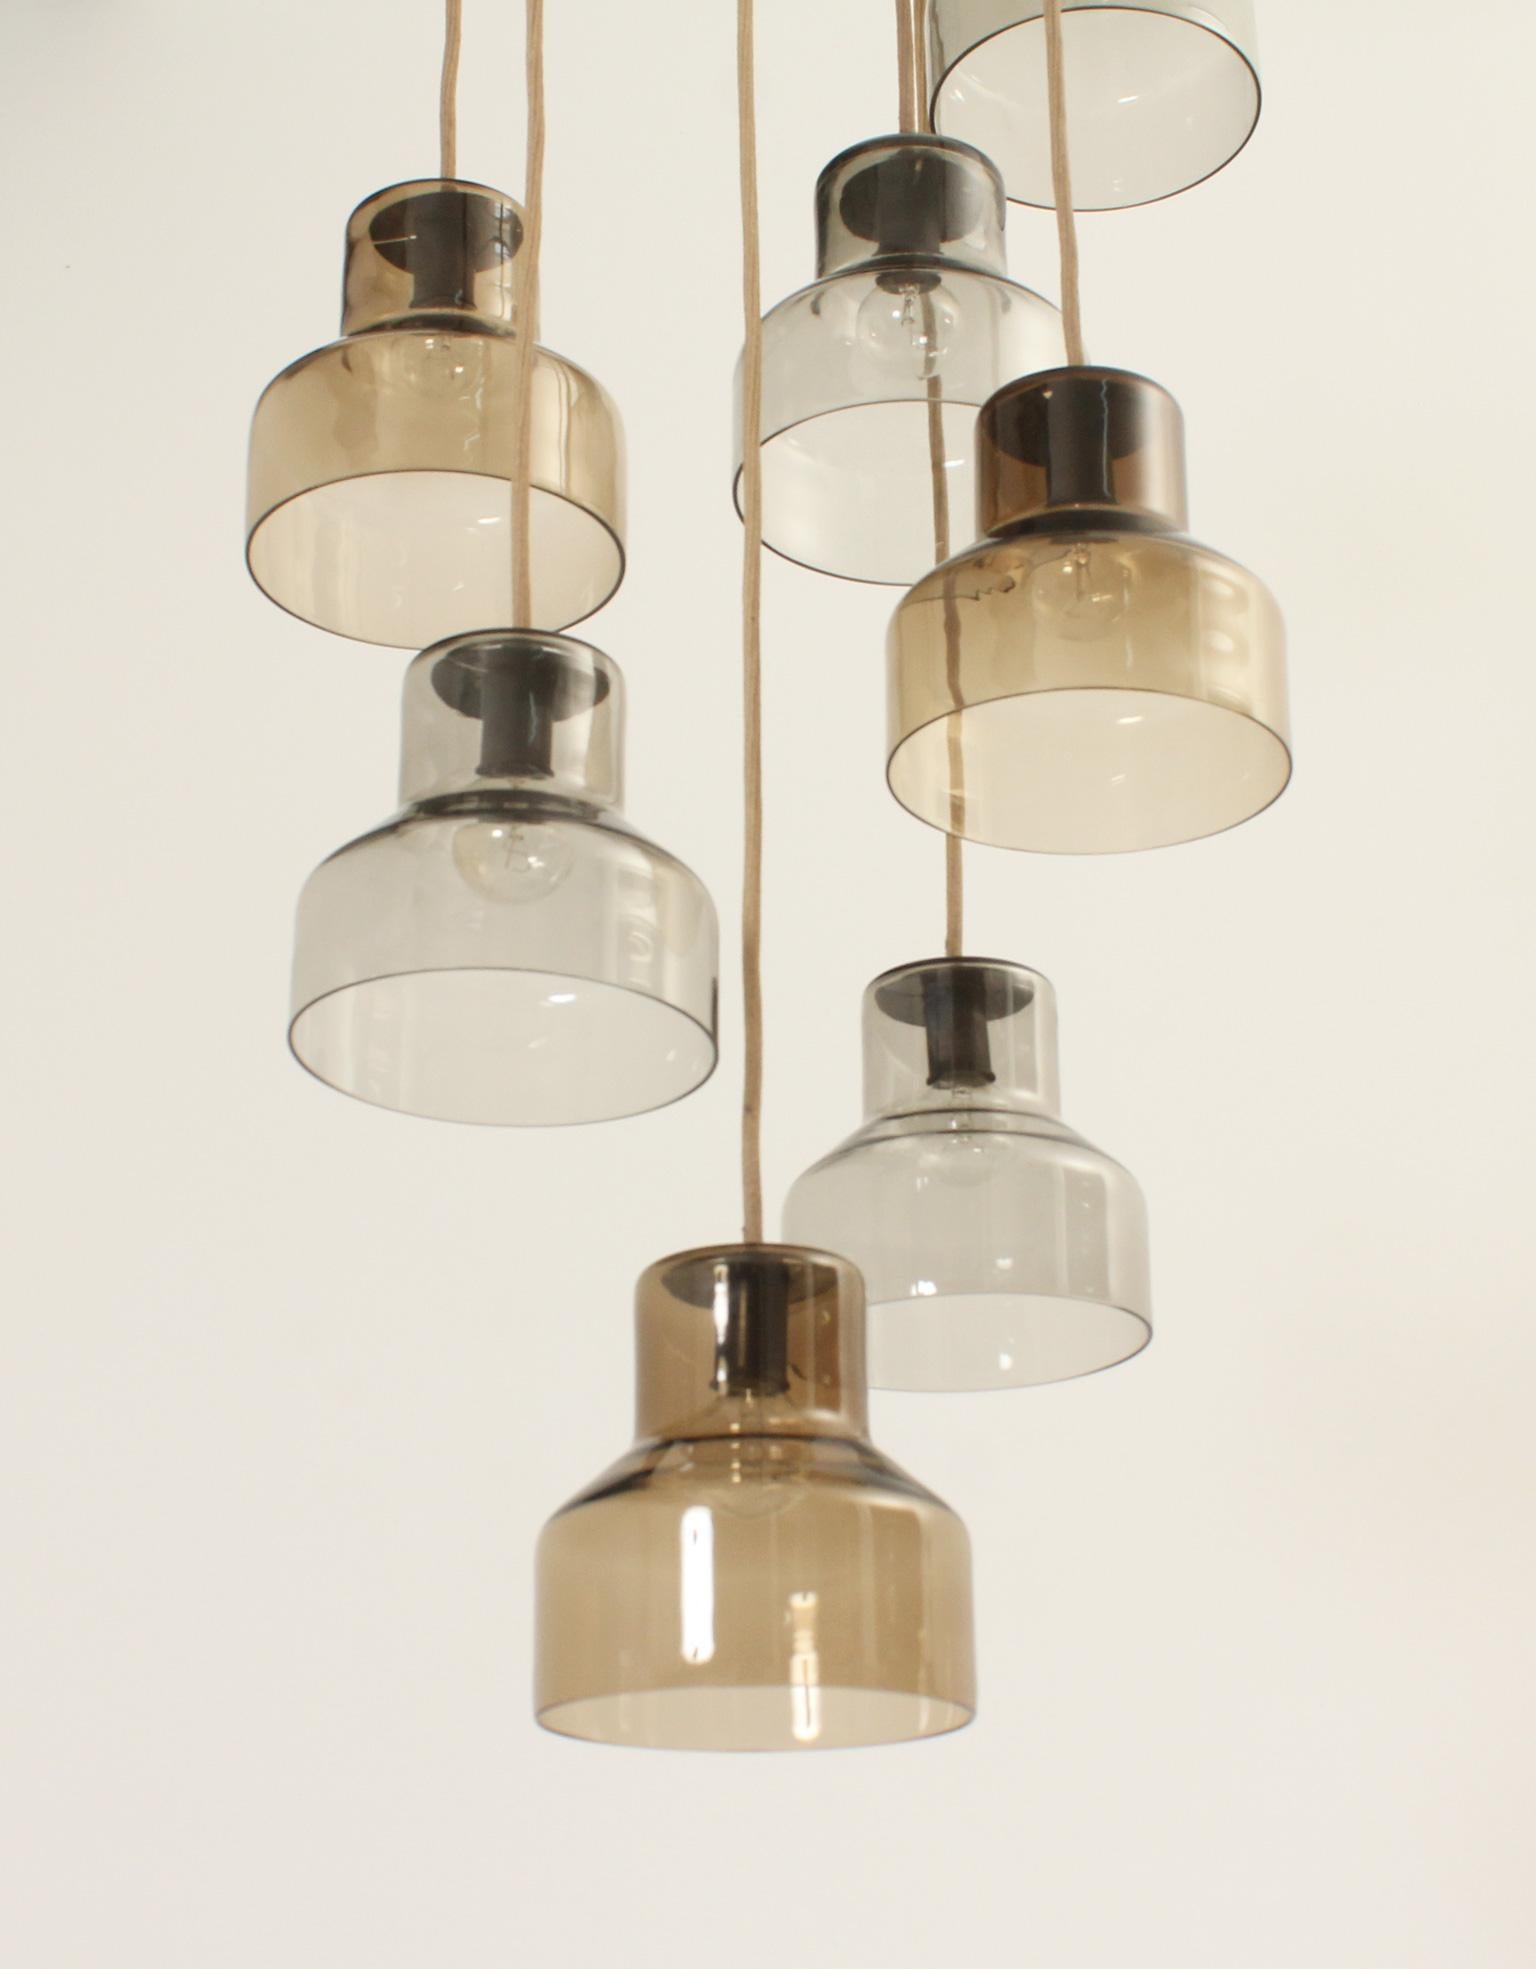 Italian Large Cascade Ceiling Lamp by Peter Pelzel for Vistosi, Italy, 1962 For Sale